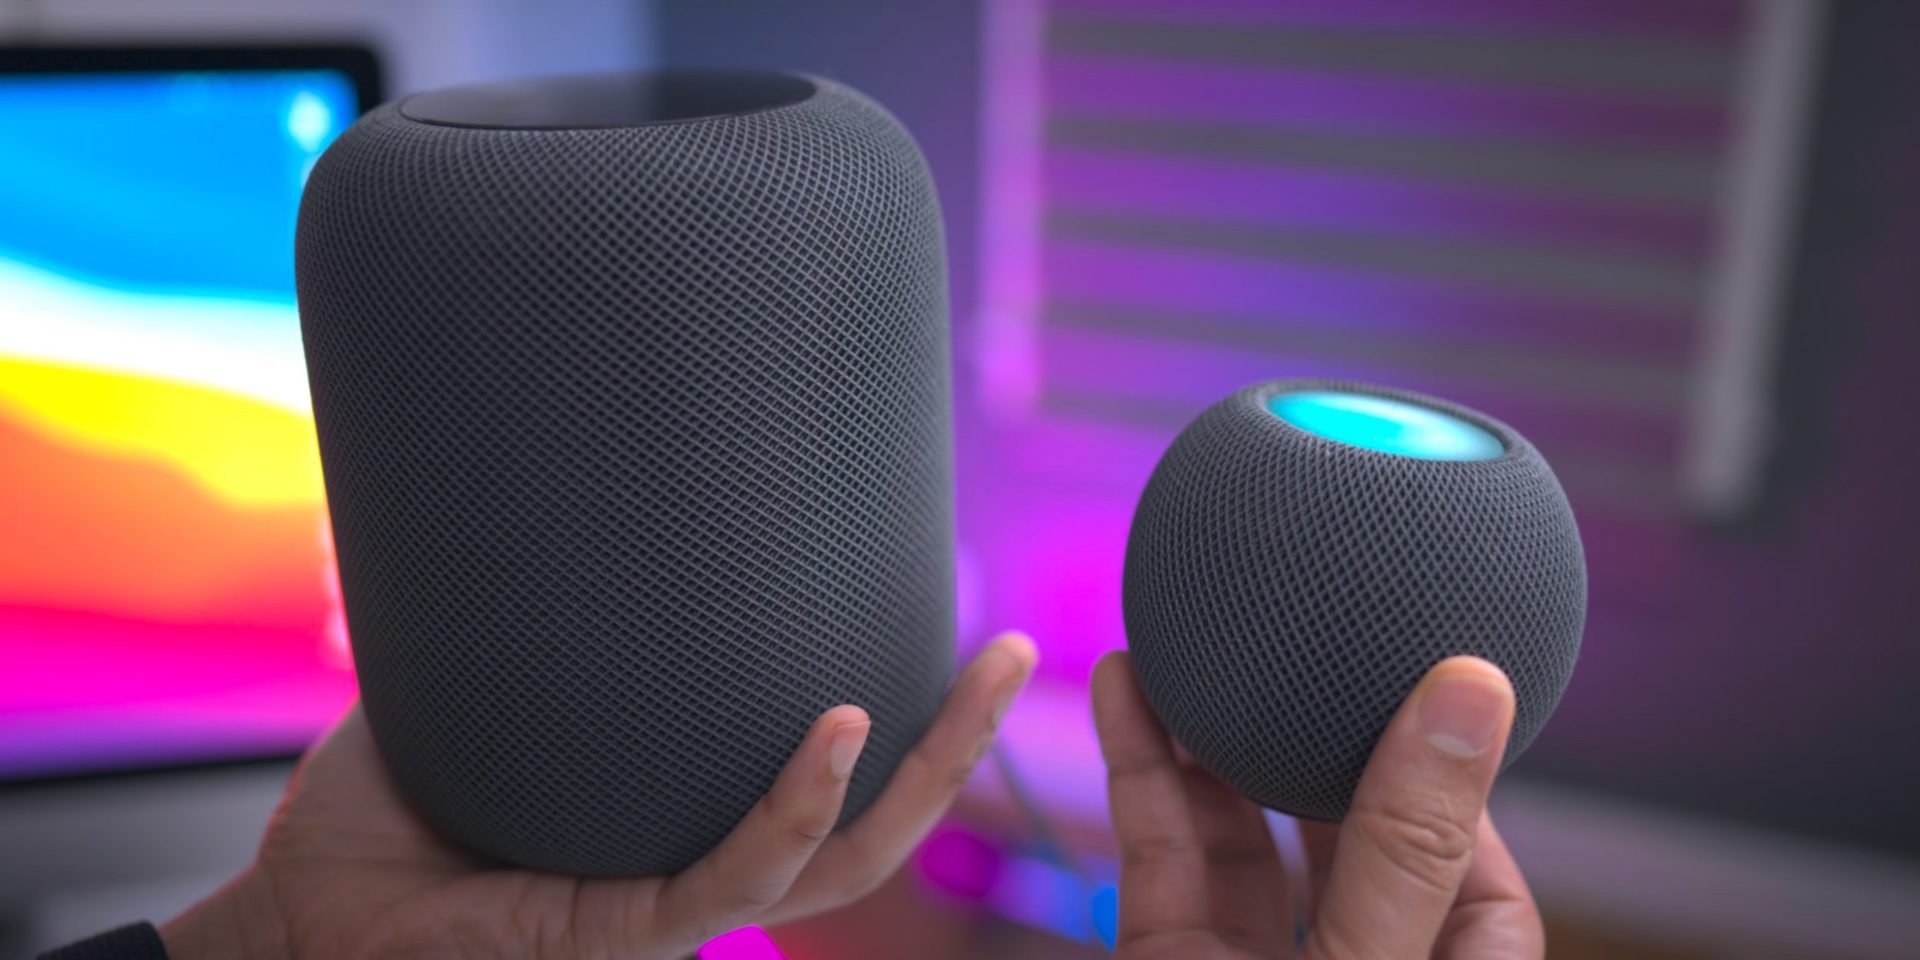 Ming-Chi Kuo predicts the appearance of AR/MR headsets from Apple, and Mark Gurman once again reminded about the new versions of the HomePod